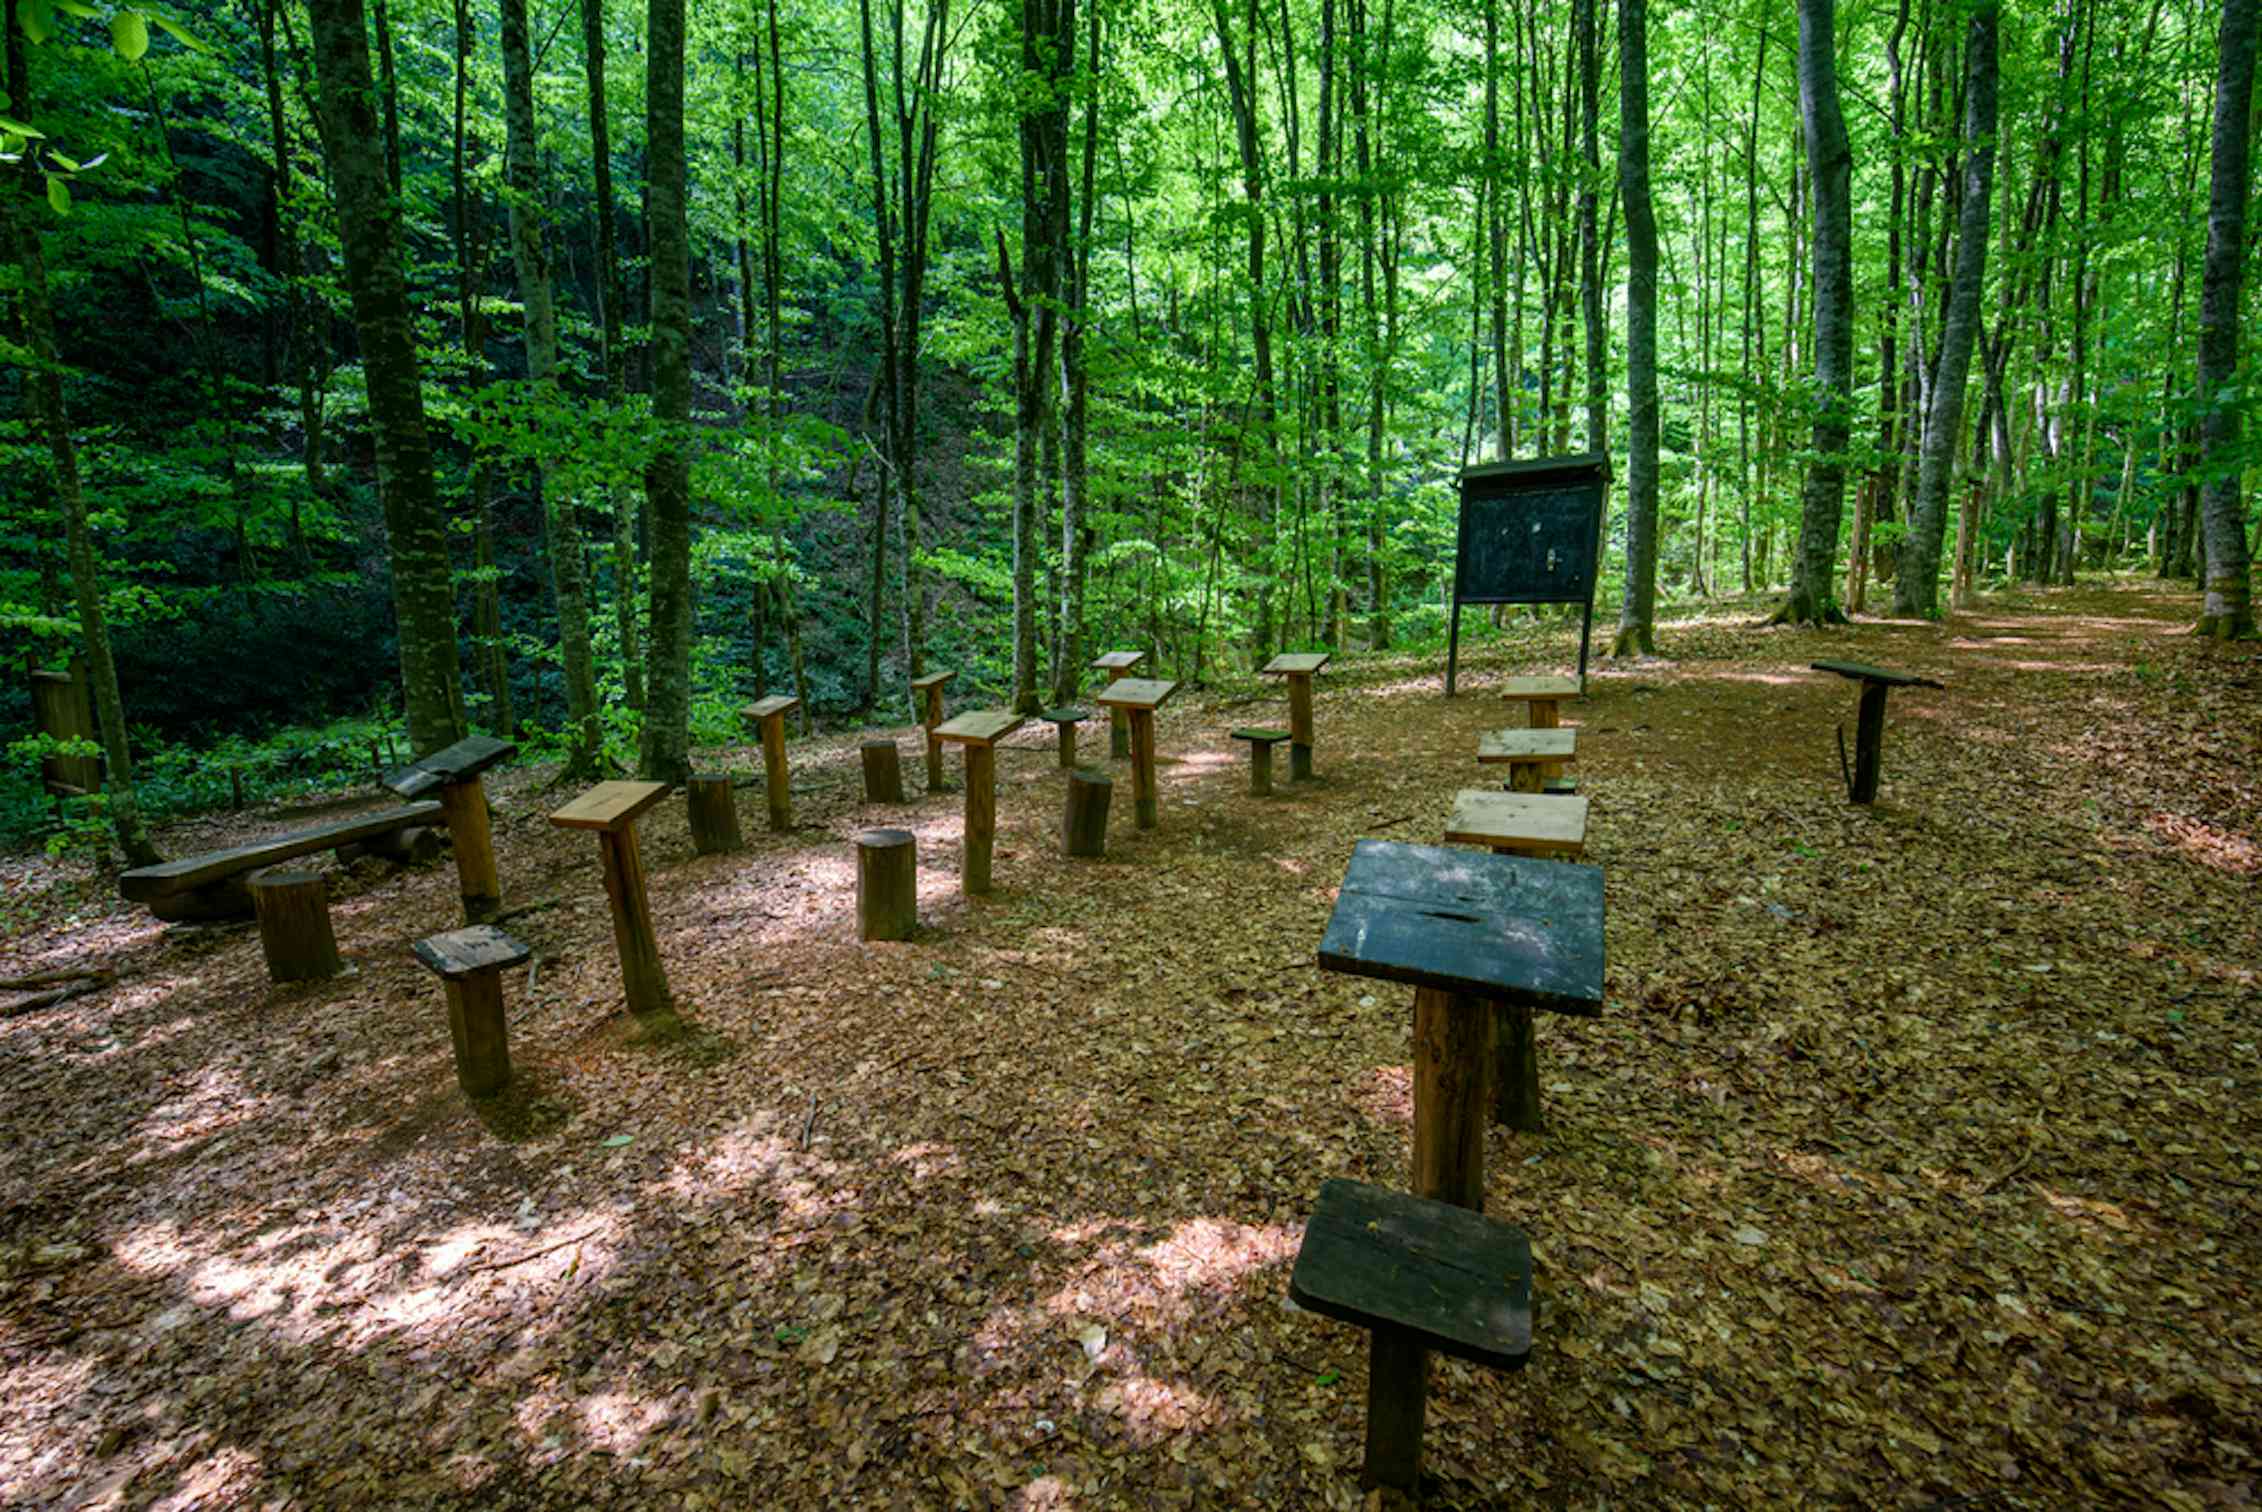 Empty wooden chairs and tables in forest cleaing with blackboard at the front.